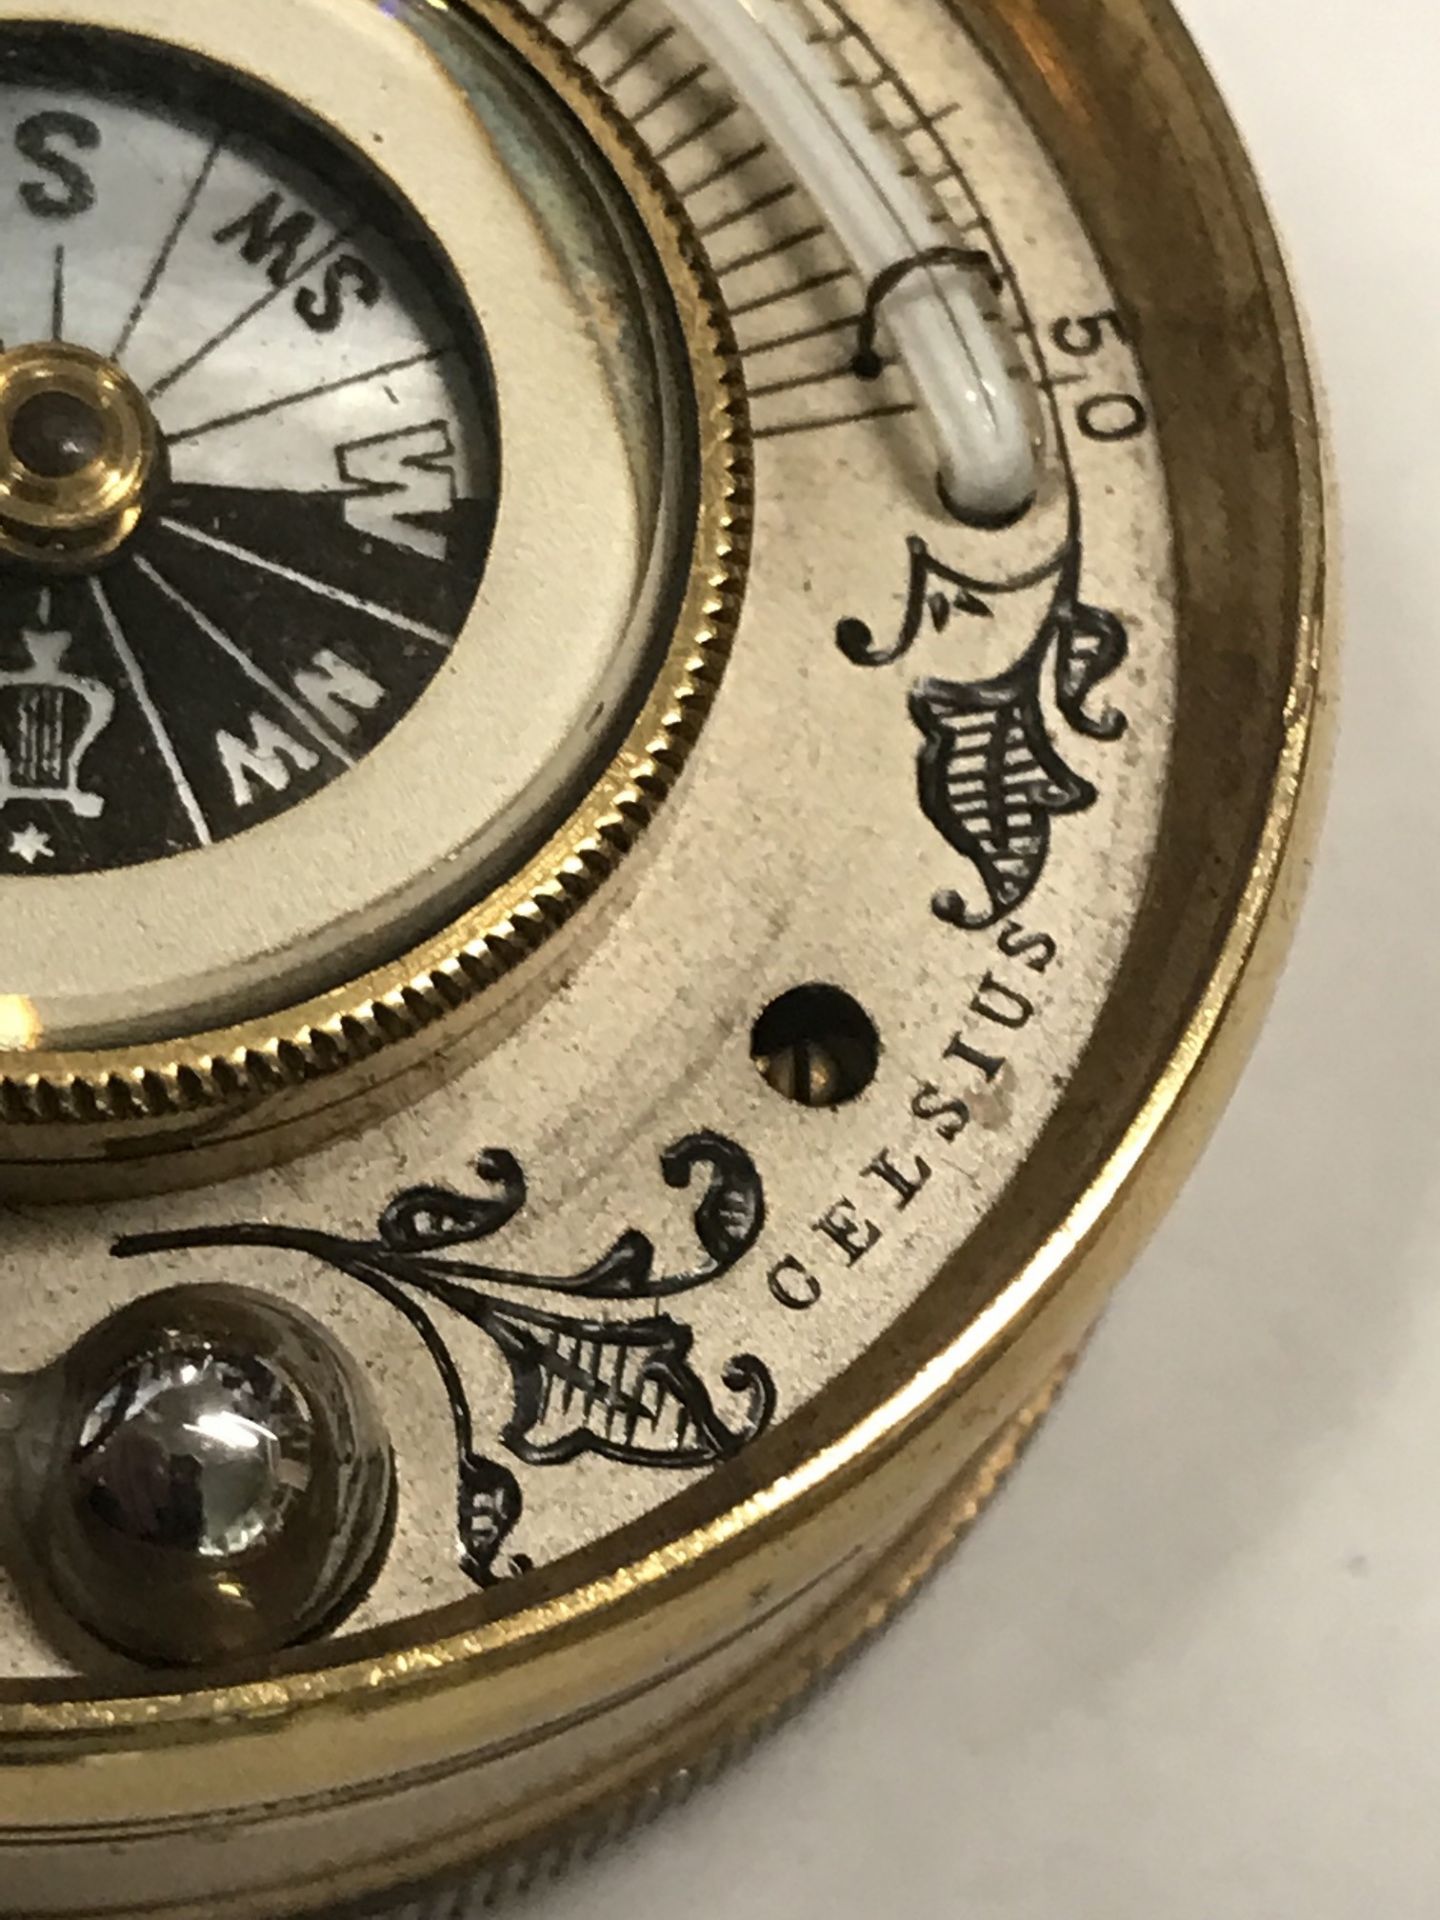 OLD COMPASS IN ORIGINAL DOUBLE OPENING CASE - Image 6 of 6